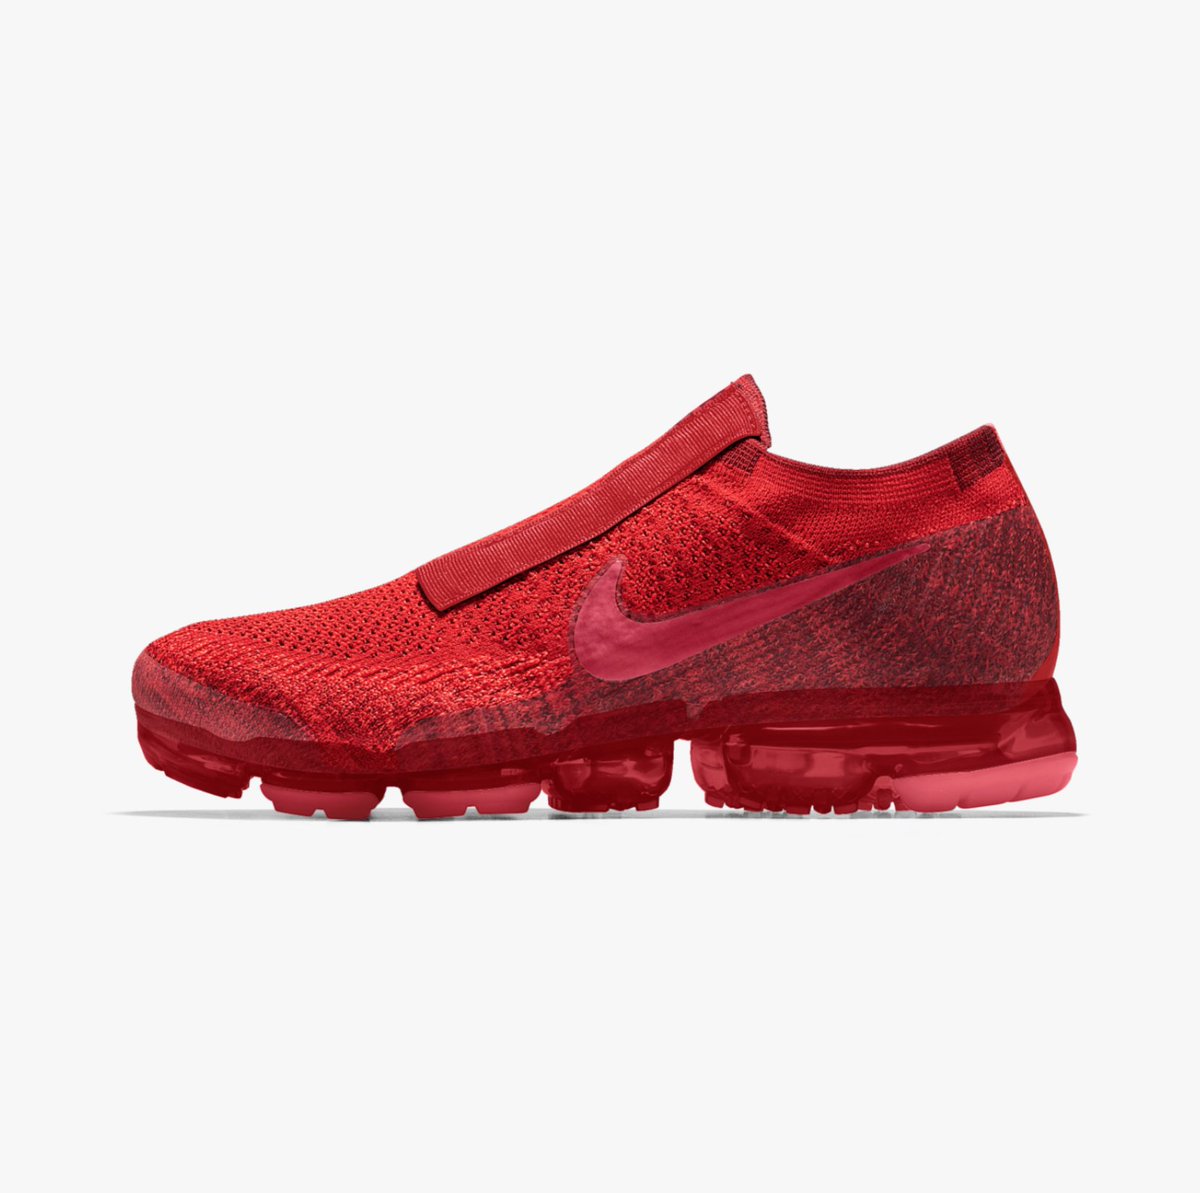 make your own vapormax